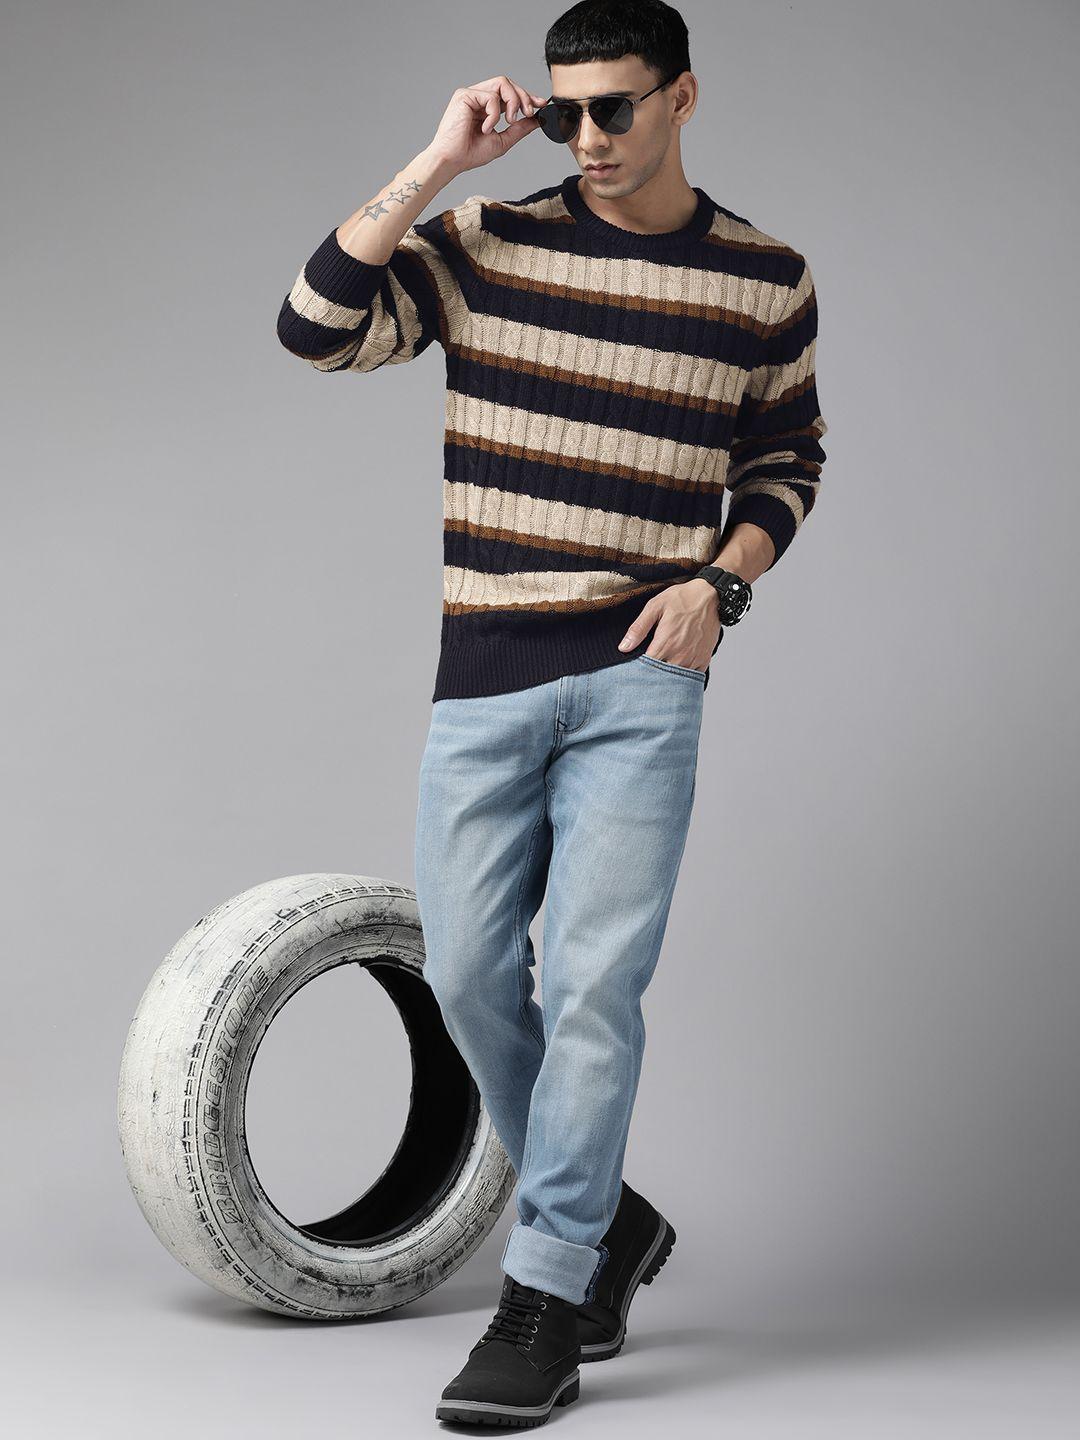 The Roadster Lifestyle Co. Men Navy Blue & Beige Striped Pullover Sweater